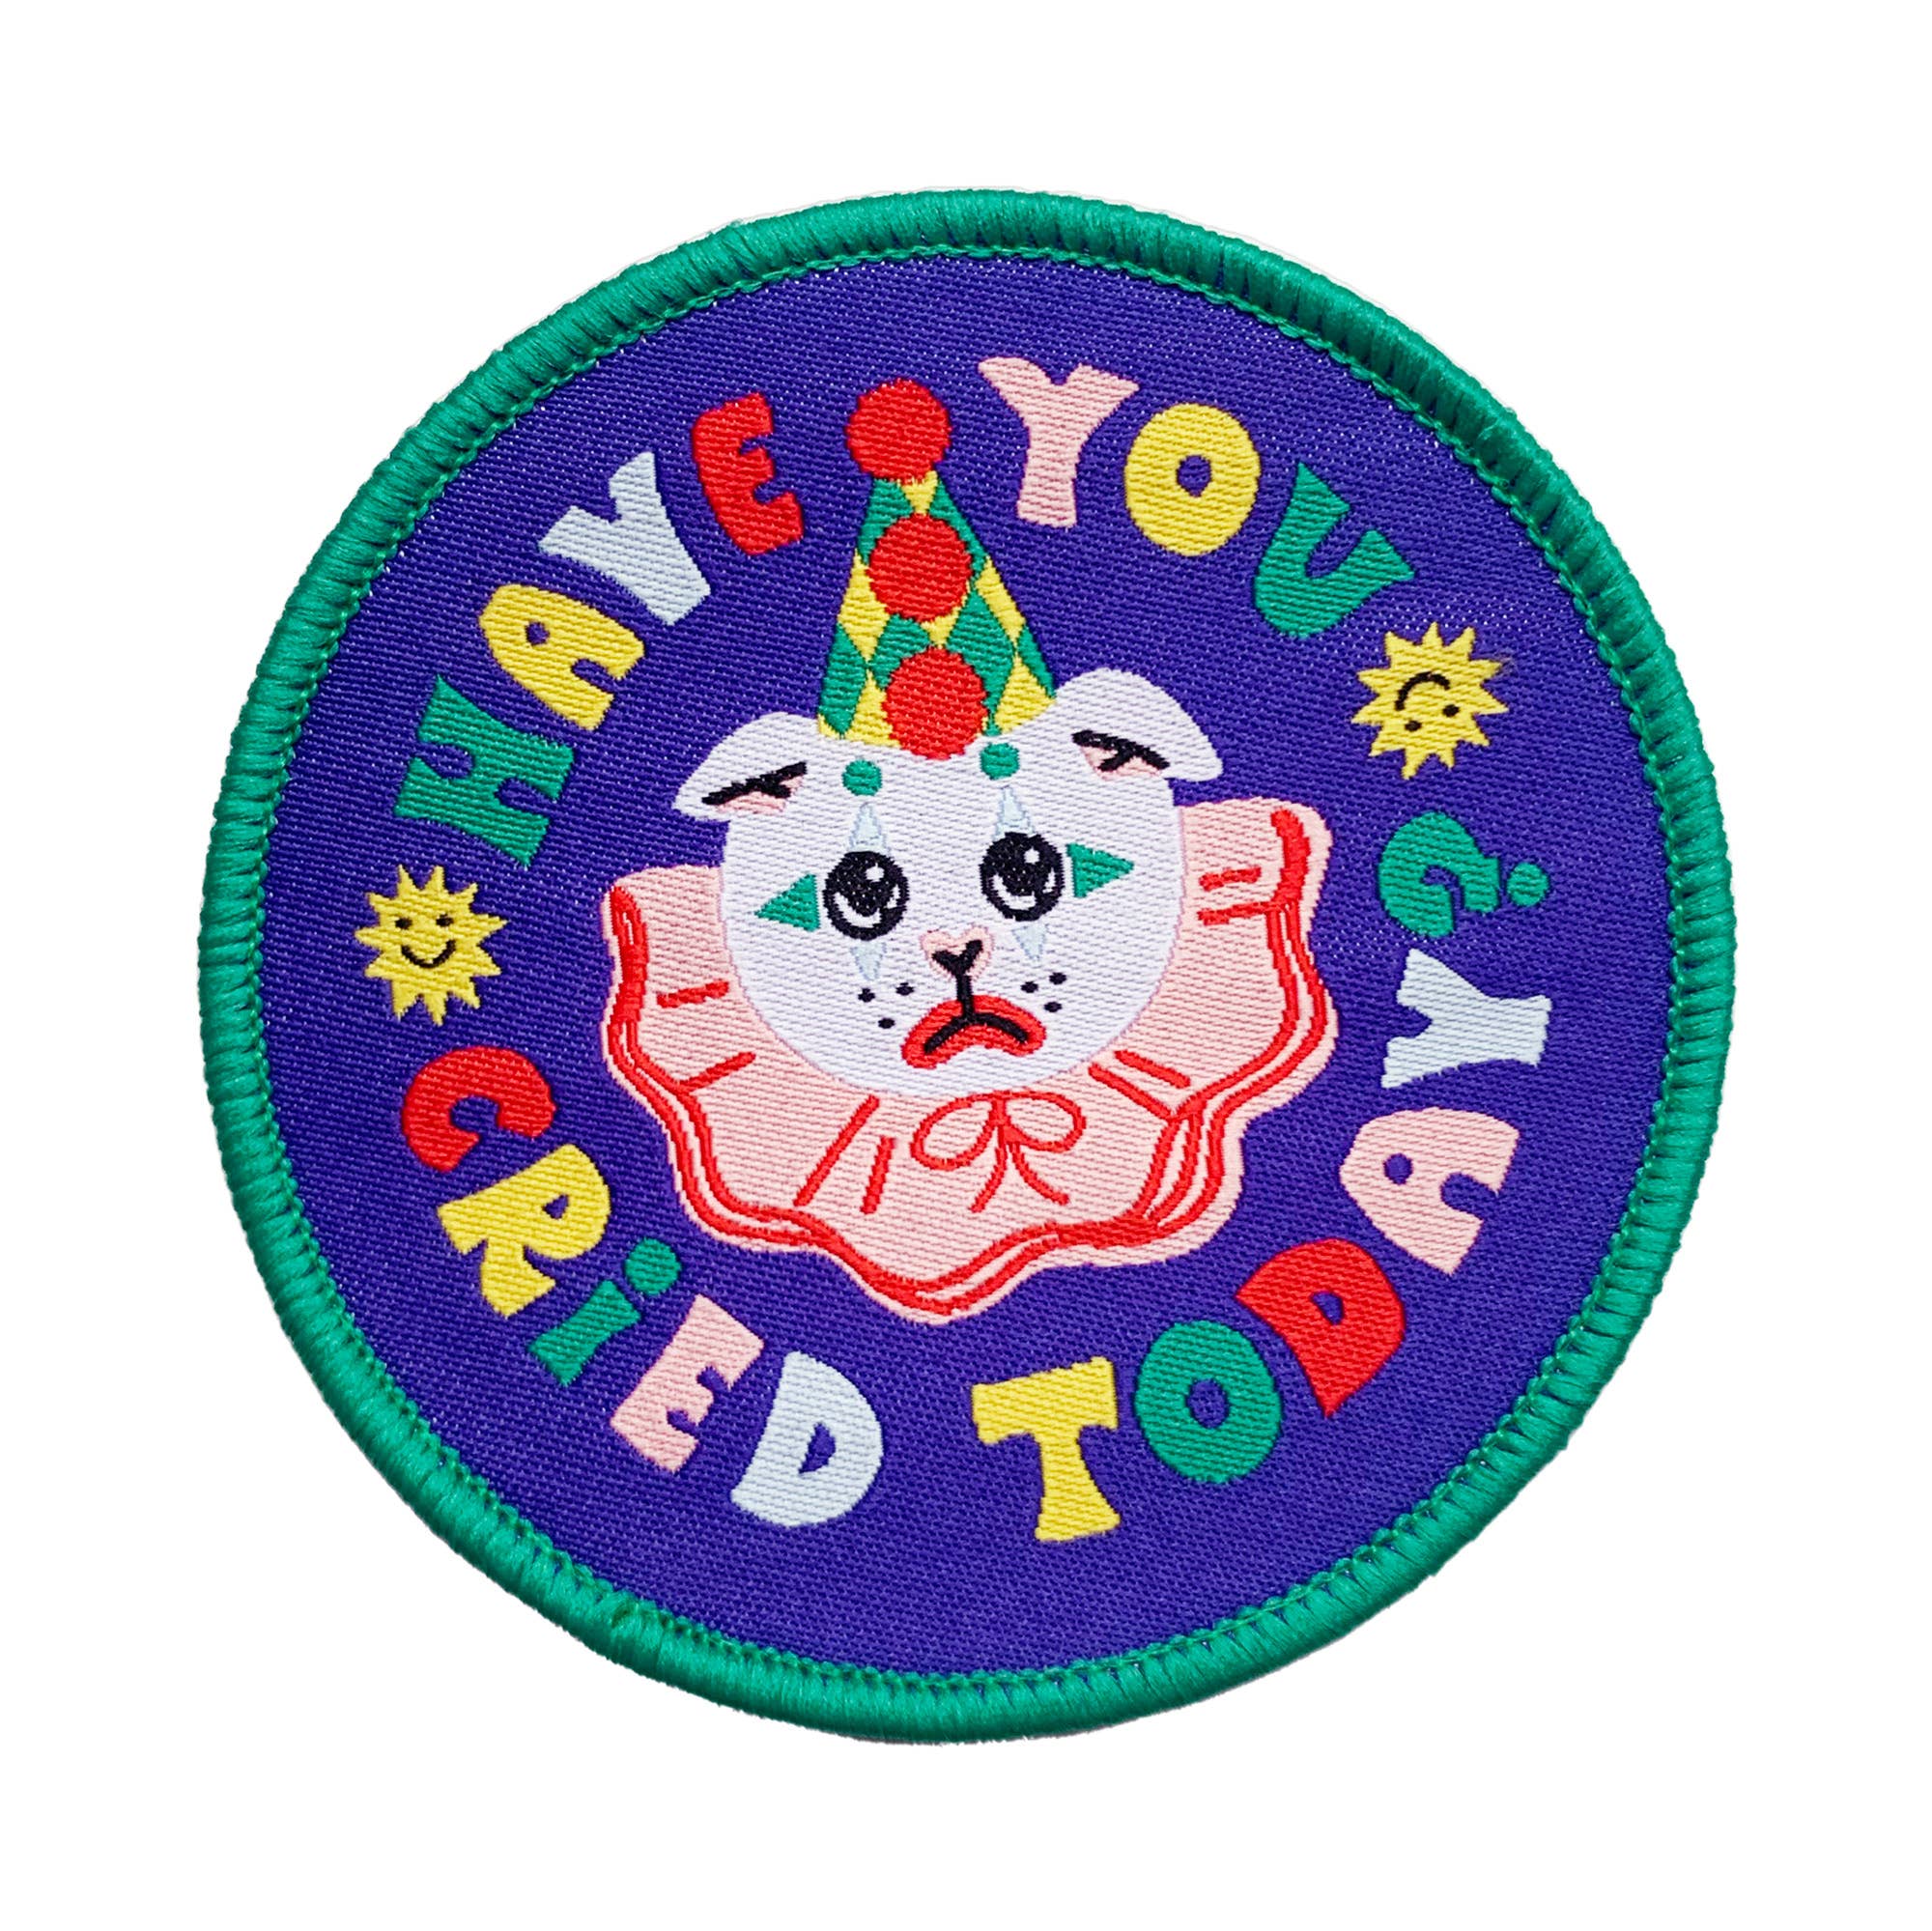 Have You Cried Today? Iron-On Patch from 5 Eye Studio